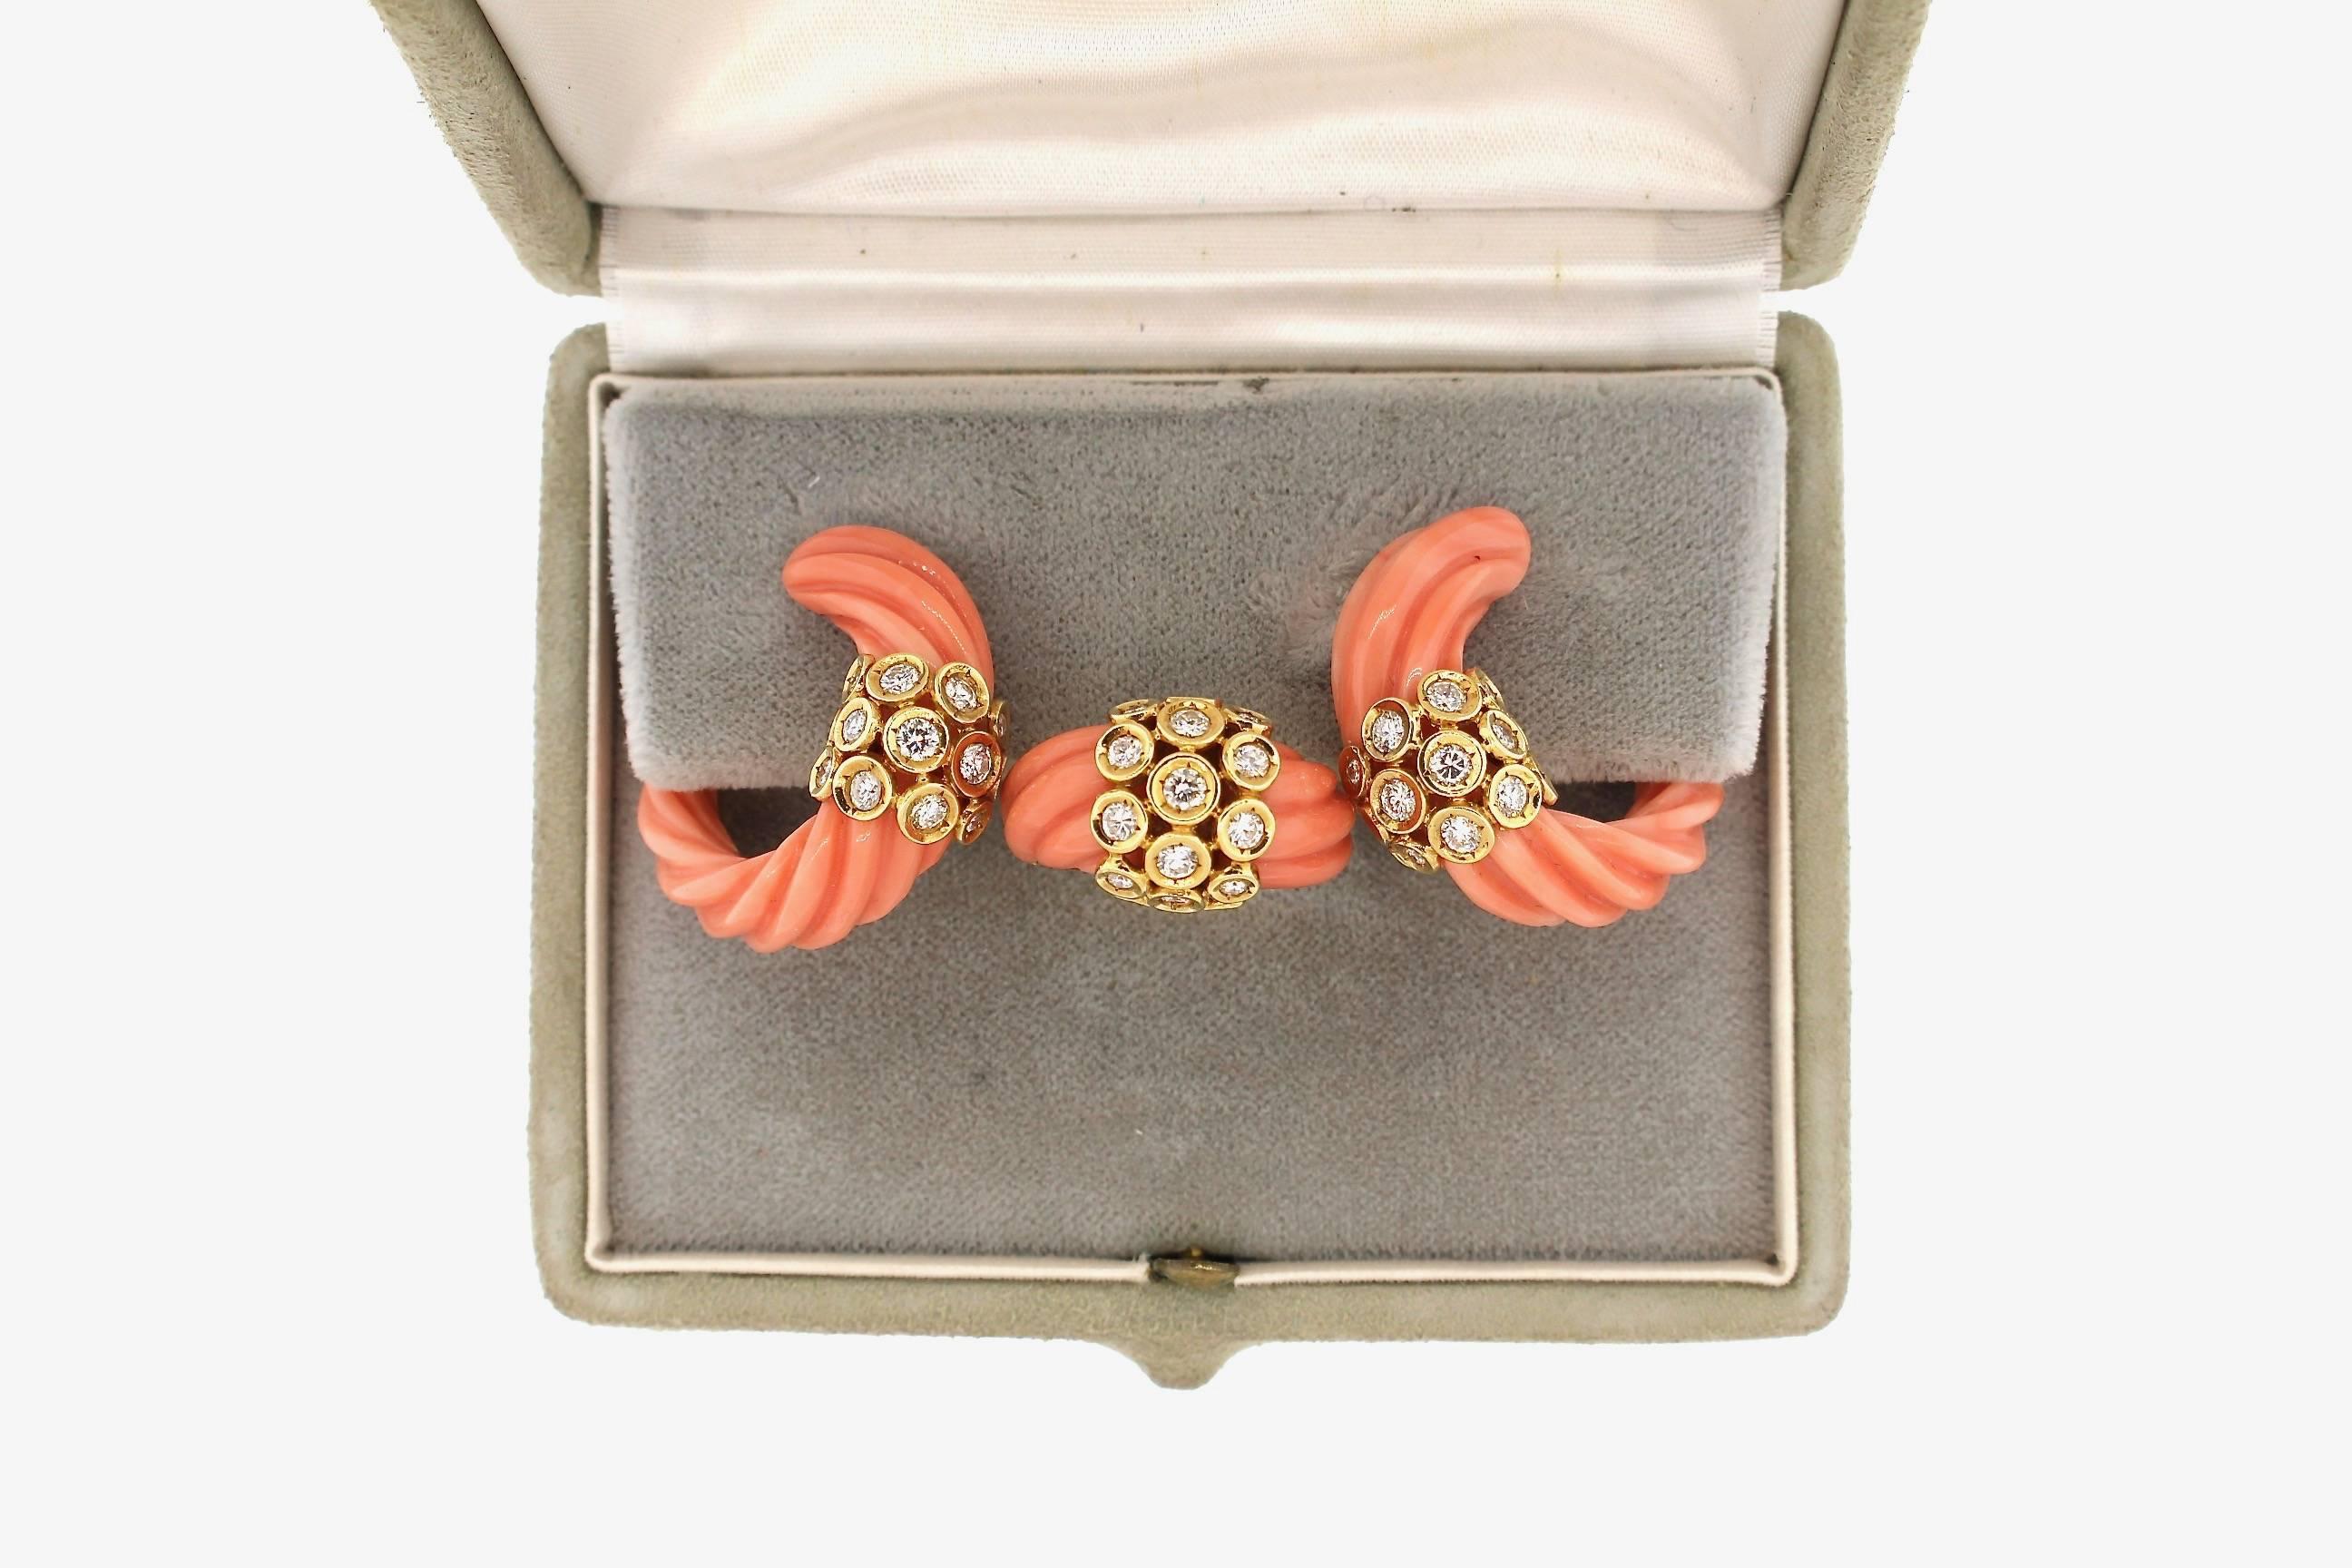 A mid-century modern fluted coral and diamond earring and ring set by Van Cleef & Arpels.  The earrings are modified hanging hoop earrings that fit front to back on the ear.  The ring is of the same fluted coral design.  The set is made in 18k